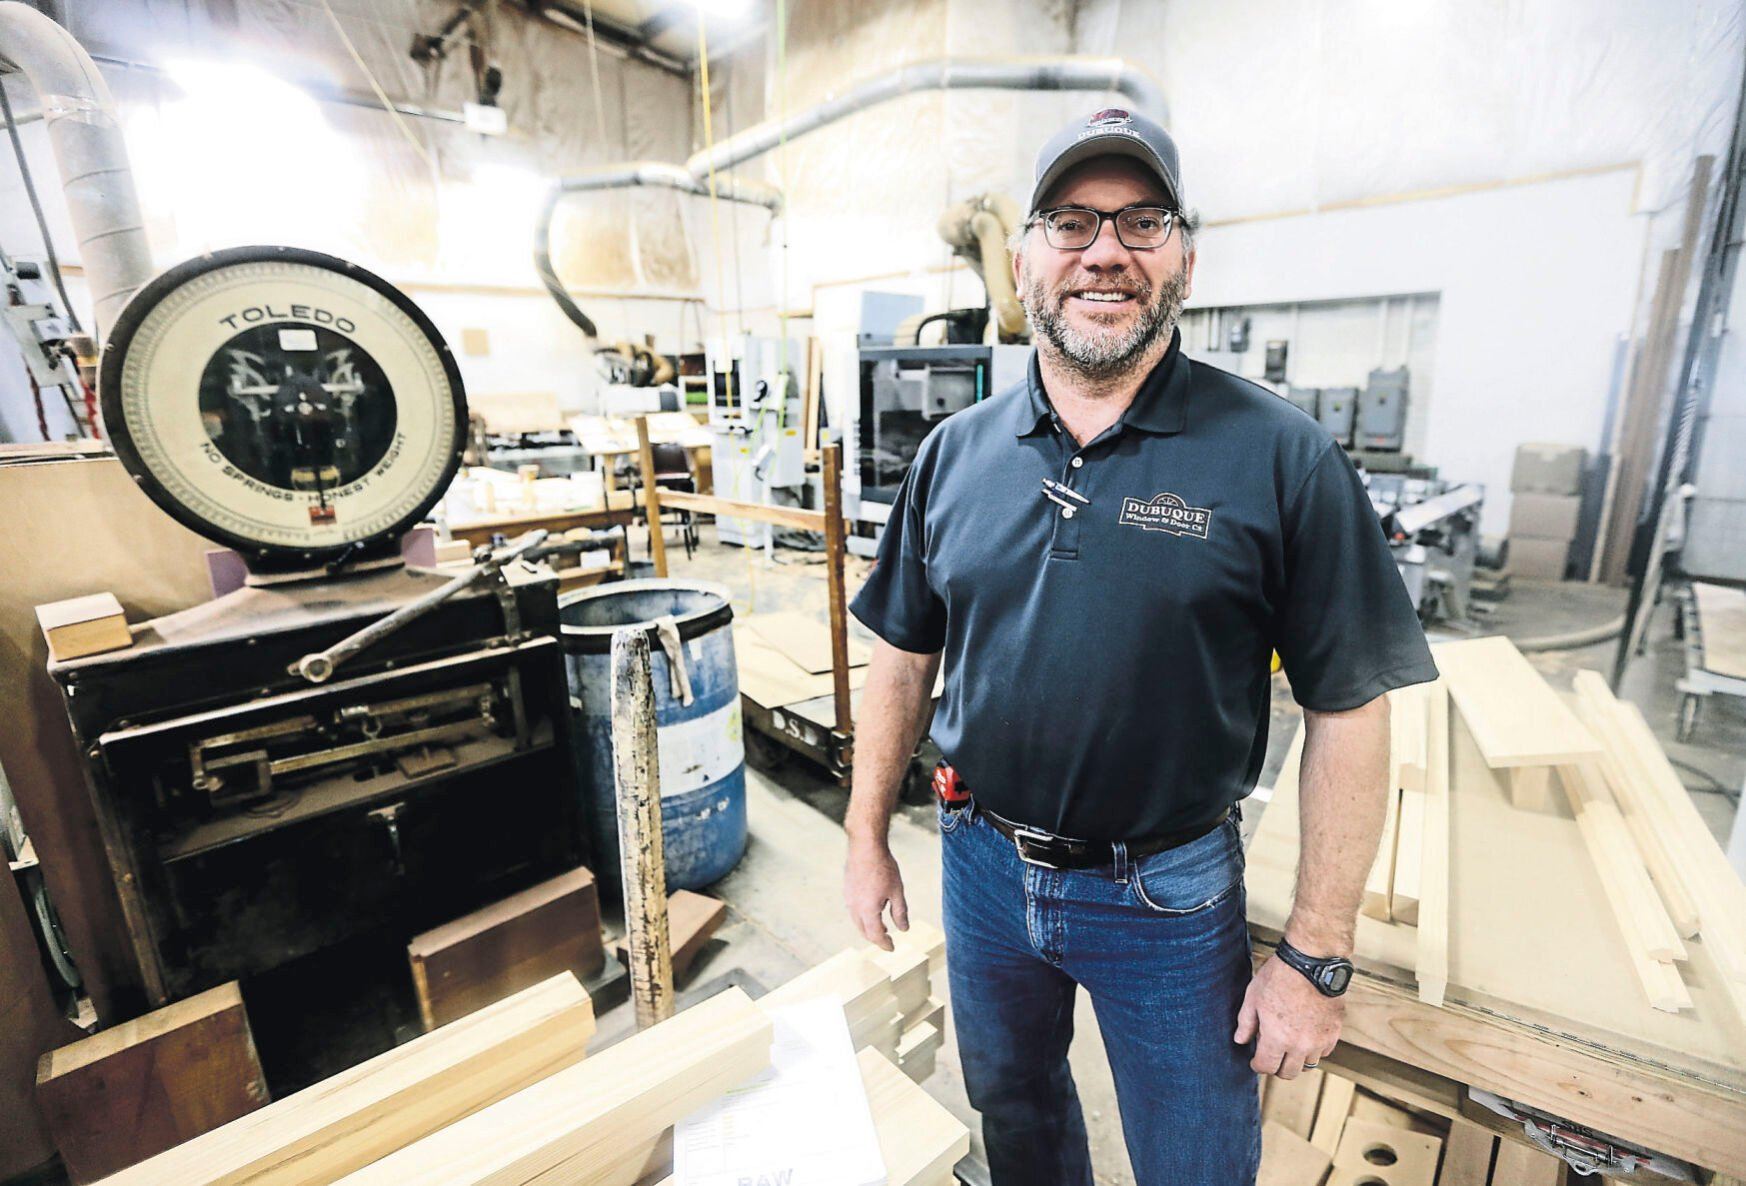 Chad Lueken owns Dubuque Window & Door Co. and Adams Architectural Millwork Co. in Dubuque.    PHOTO CREDIT: Dave Kettering